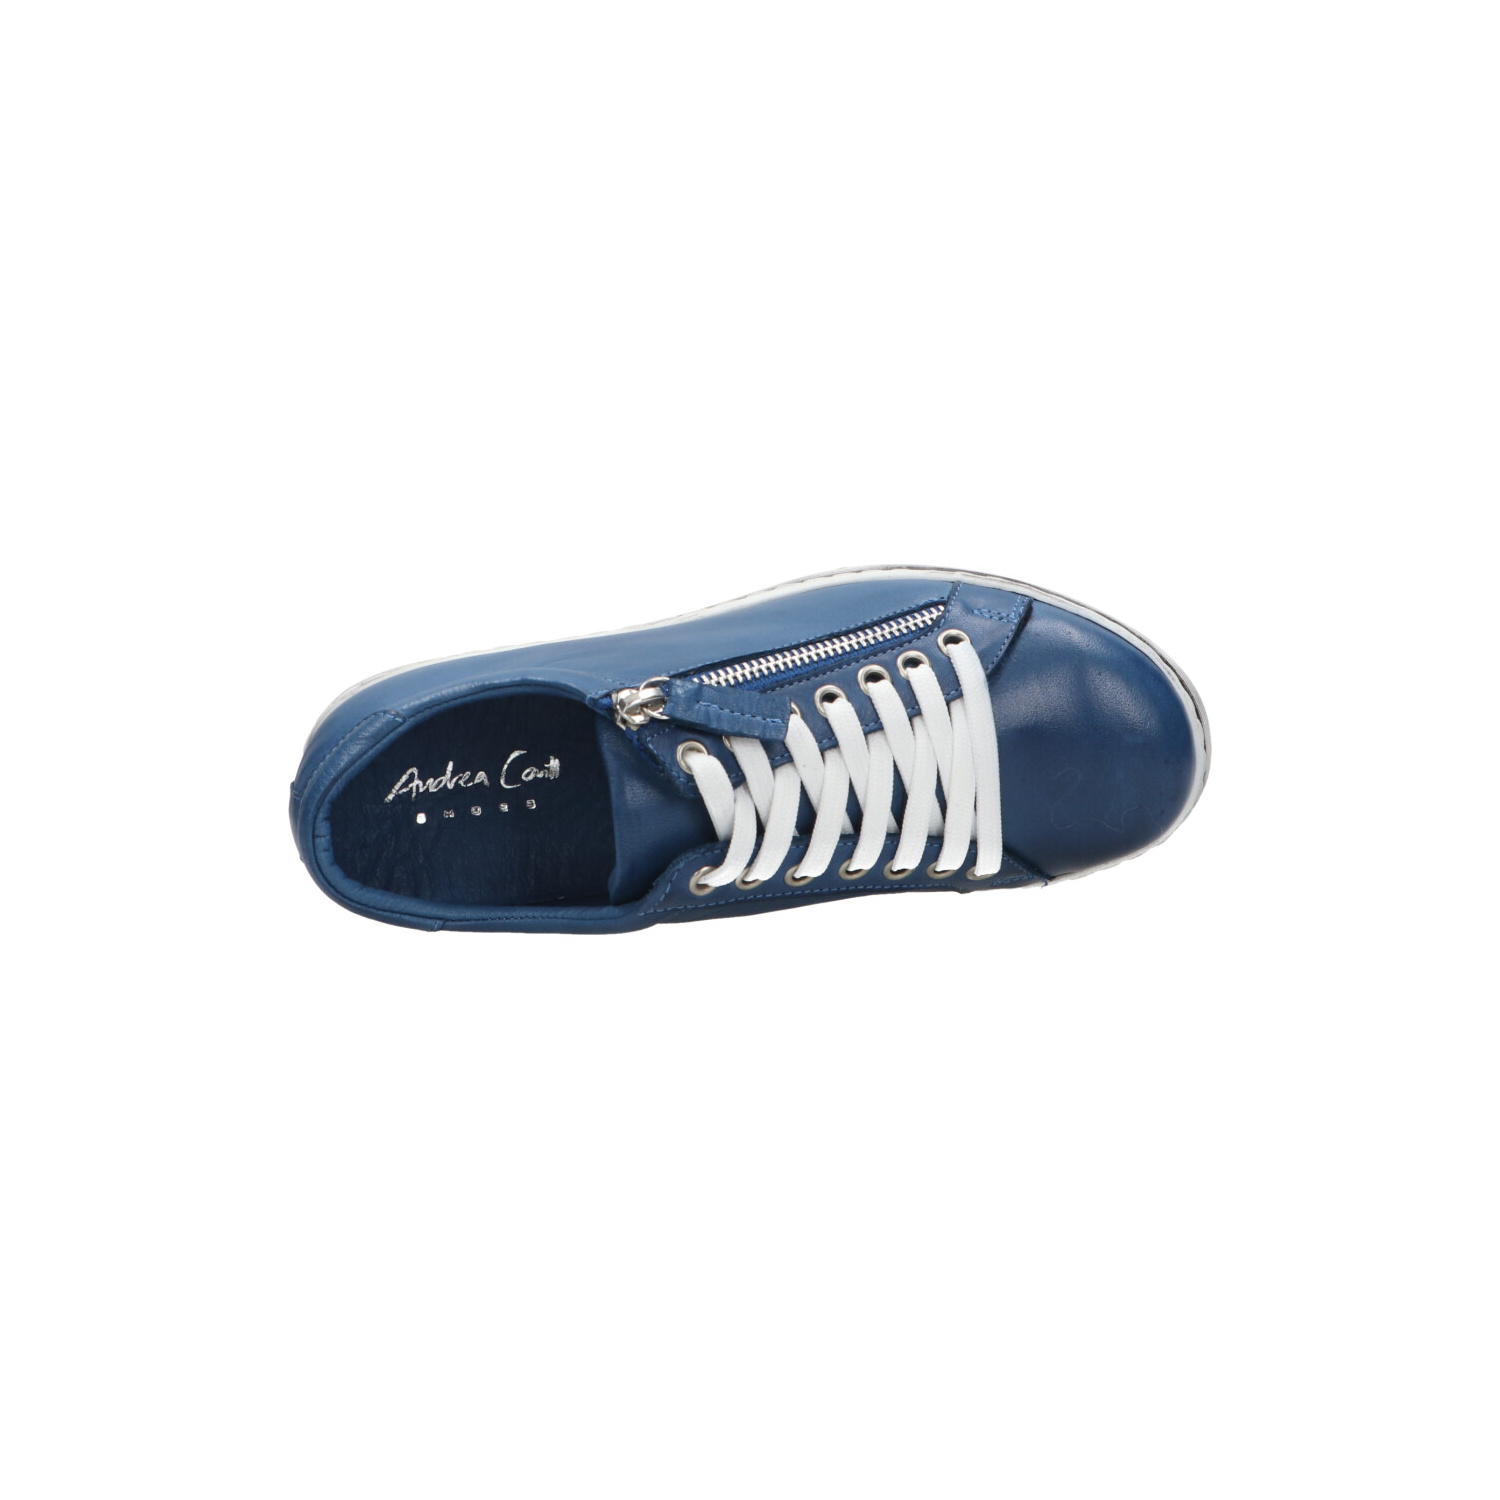 Andrea Conti Low sneaker blue - Low sneakers - Shoes - Ladies - Berca shoes